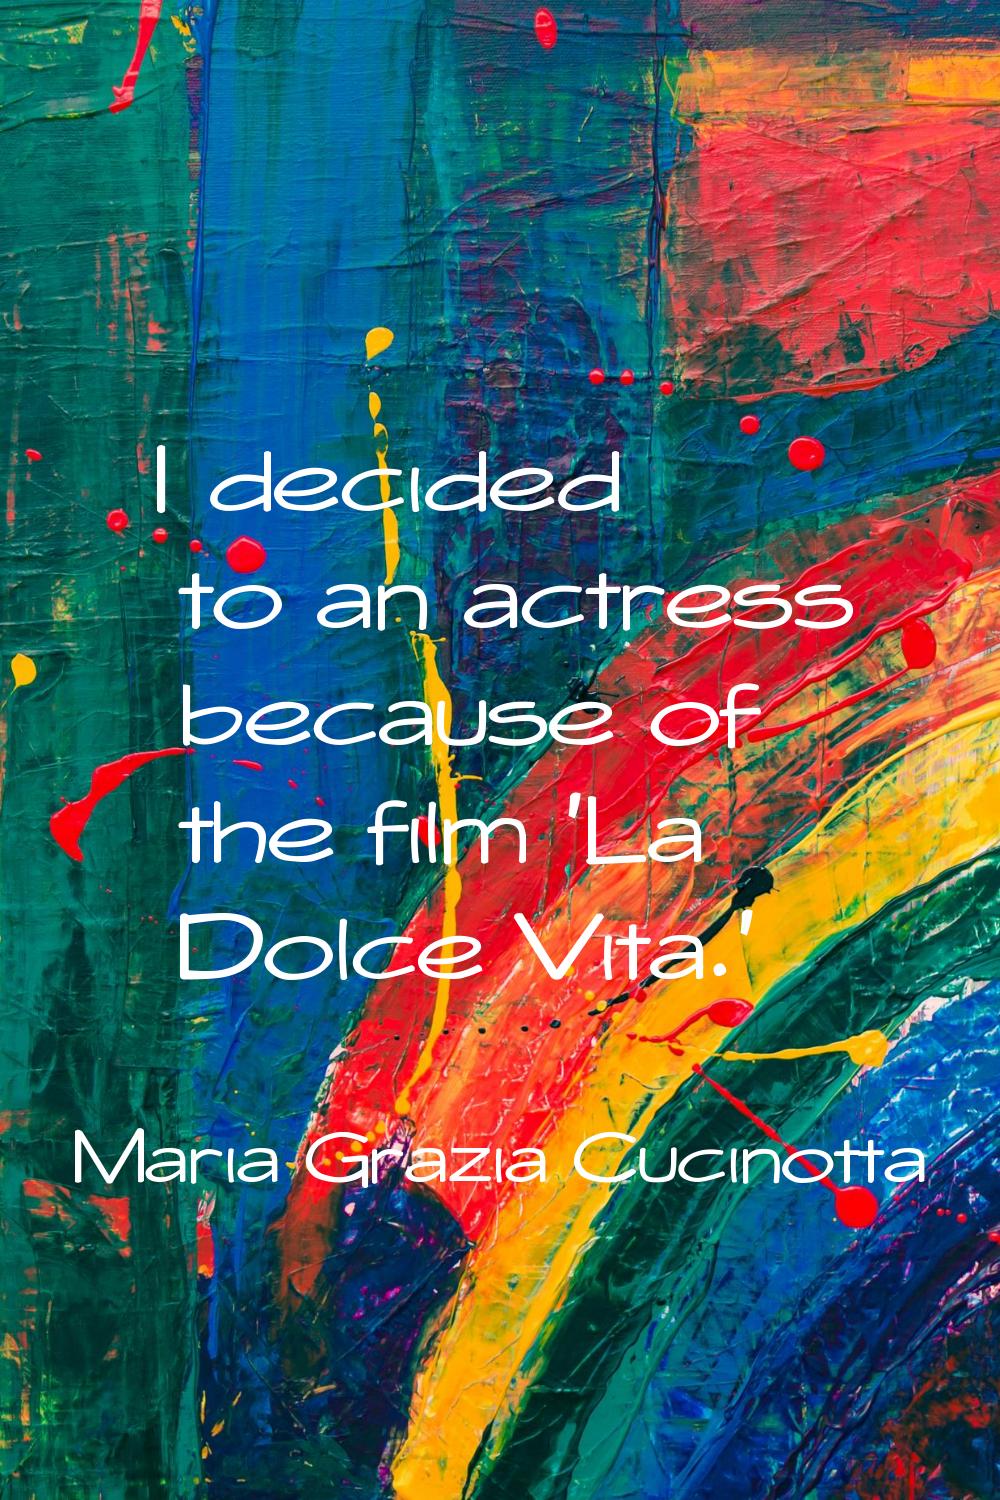 I decided to an actress because of the film 'La Dolce Vita.'